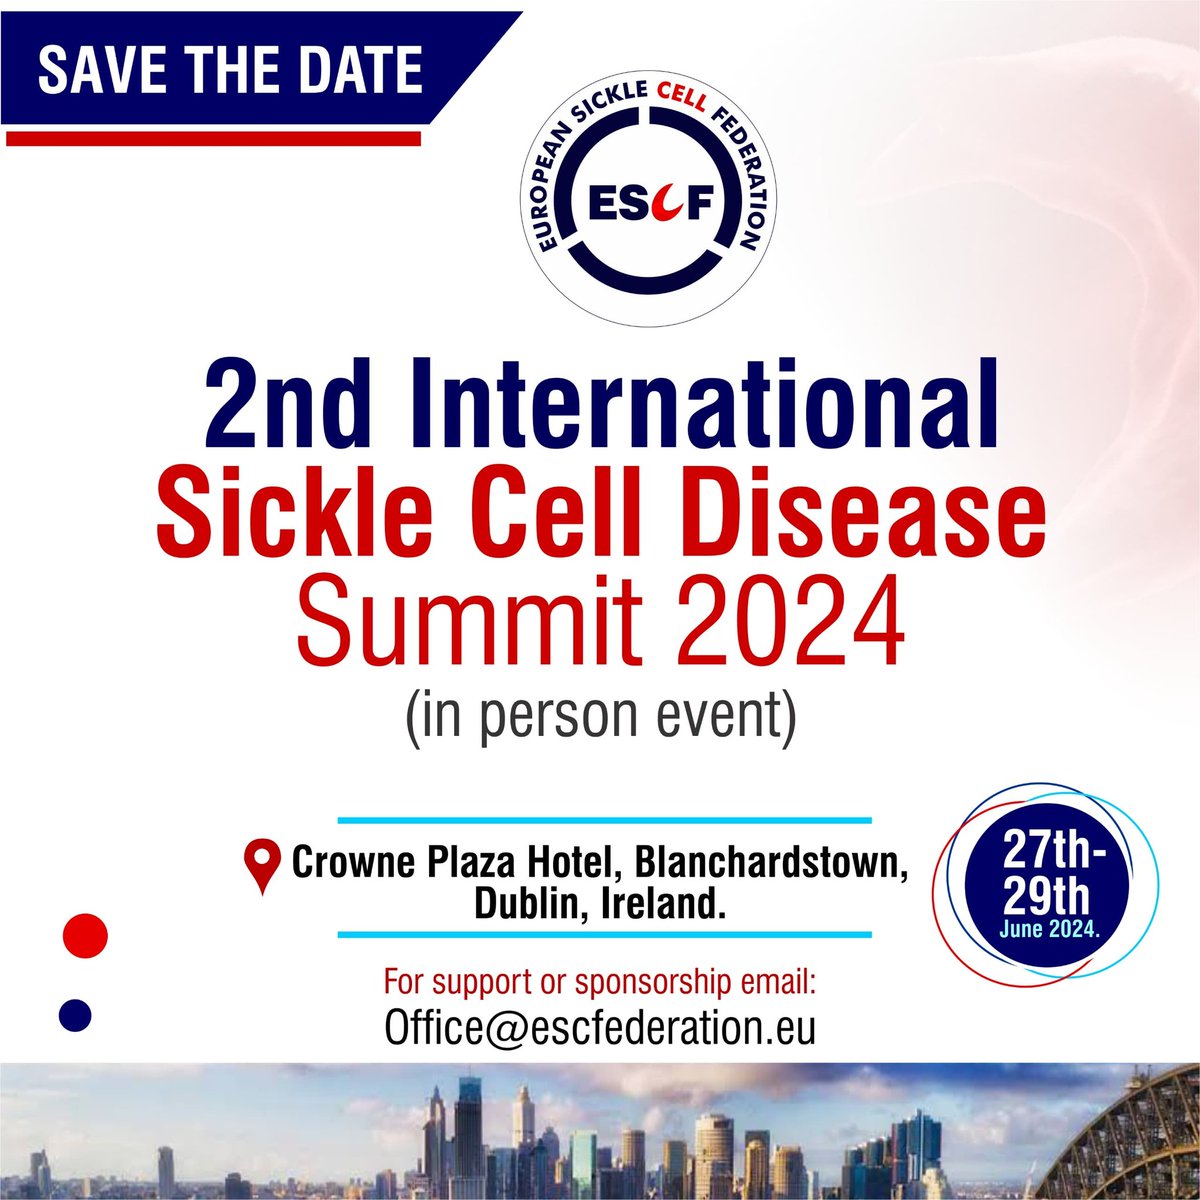 Save this Date!! Our International Sickle Cell Disease Summit is coming up this June 27th-29 2024. Registration open escfederation.eu/register The perfect place to be among patients, clinicians and industry Join us for a great information and networking experience. #ESCFSummit24